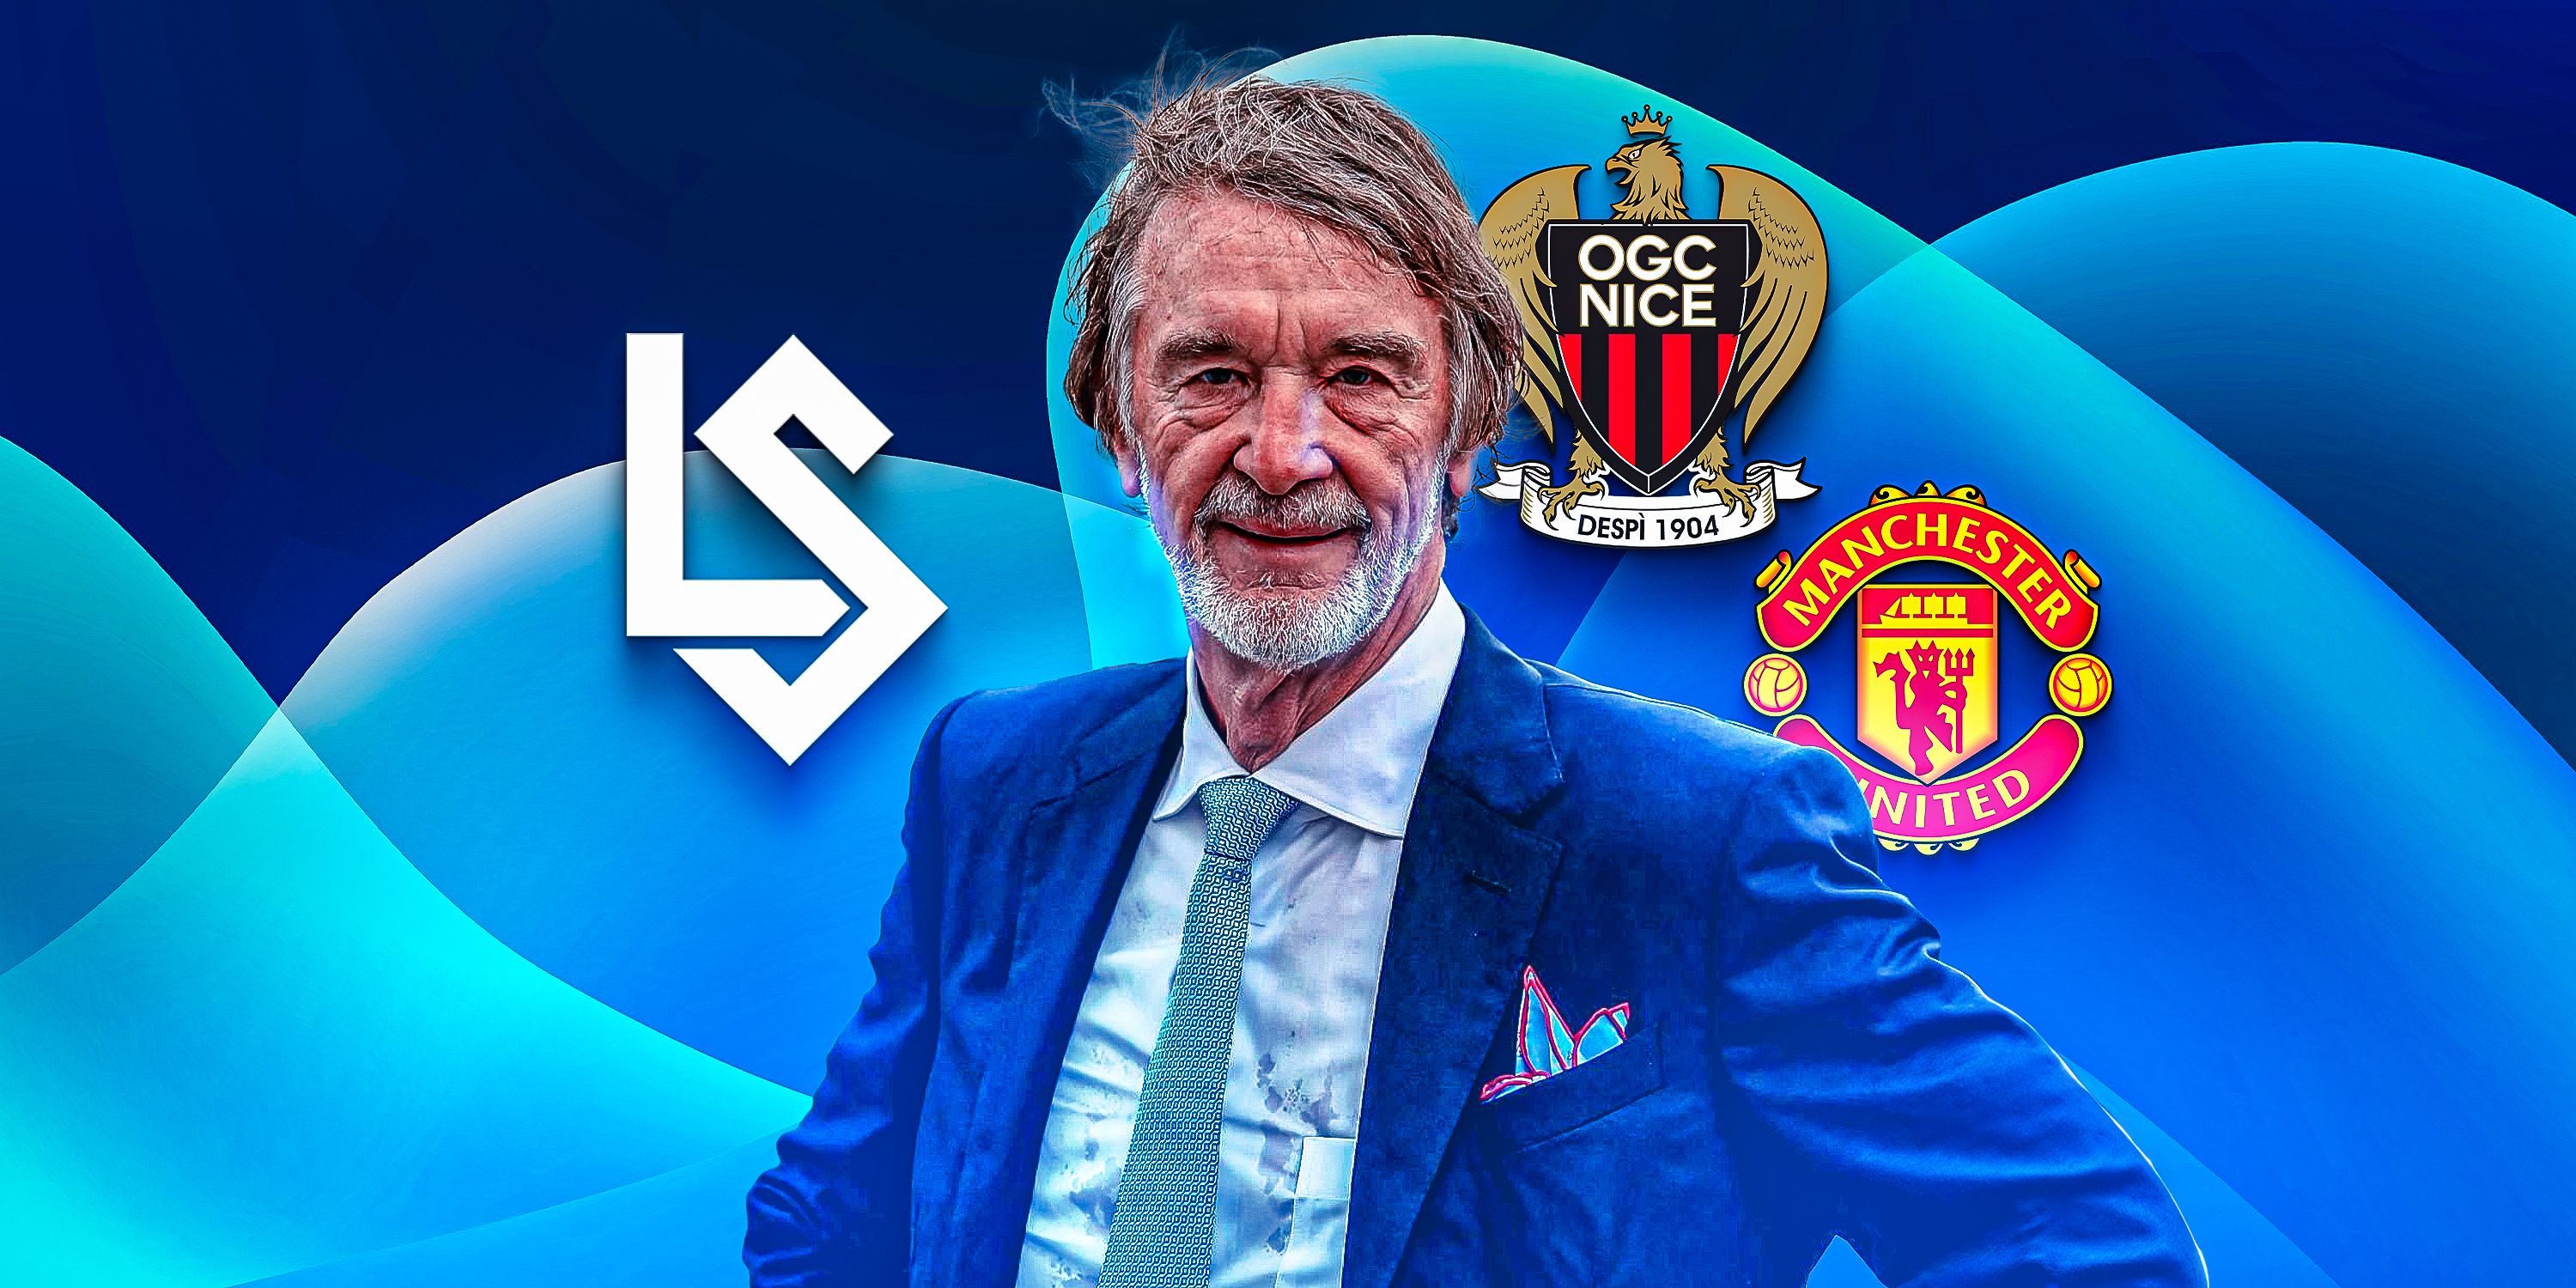 Image of Jim Ratcliffe in front of the 3 football teams he owns